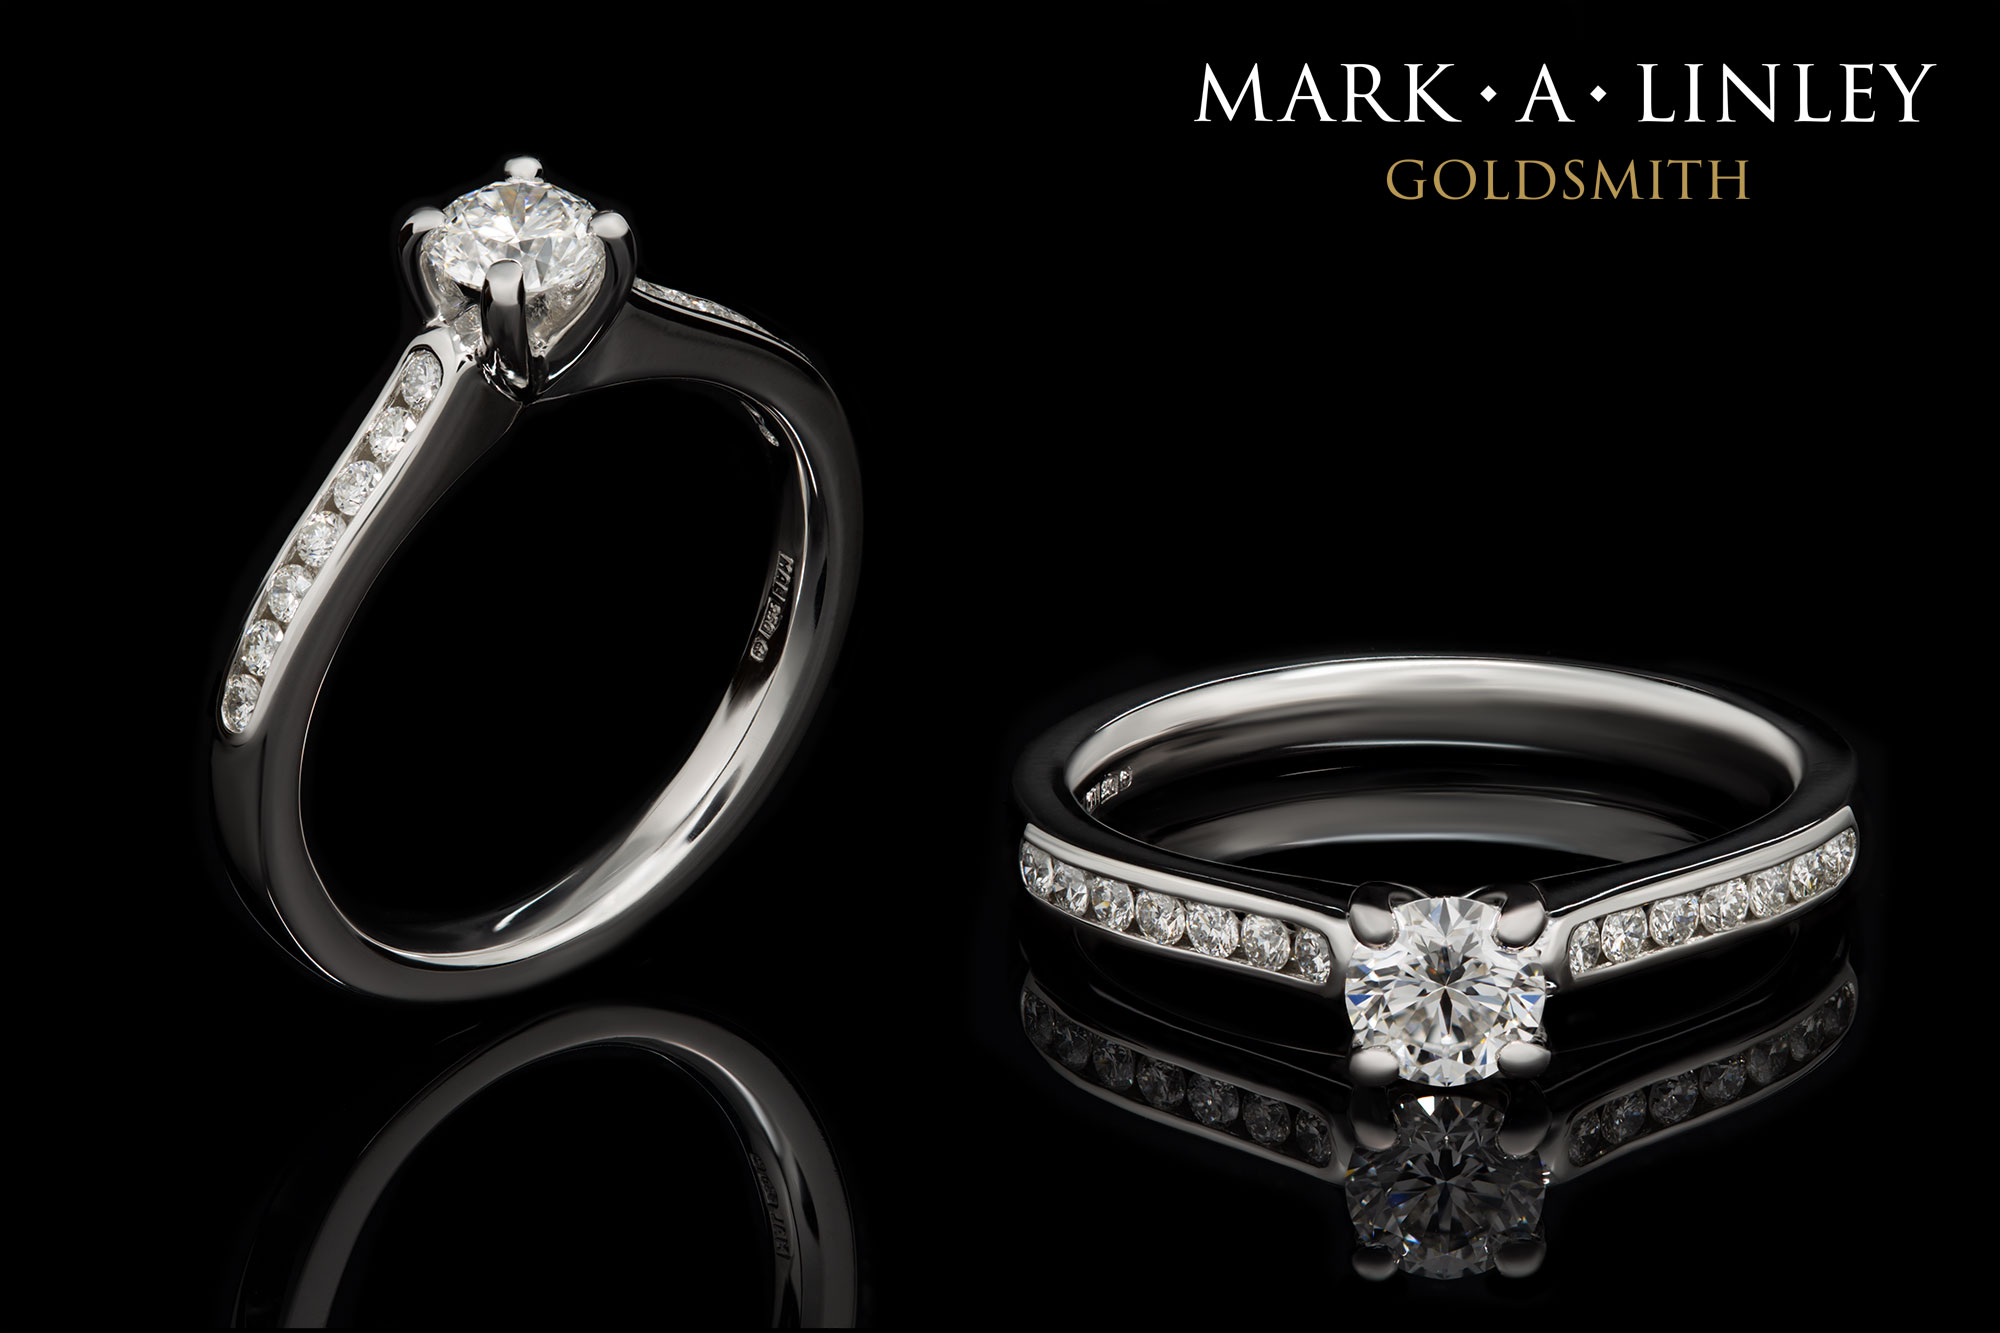 Platinum solitaire ring with diamond set shoulders